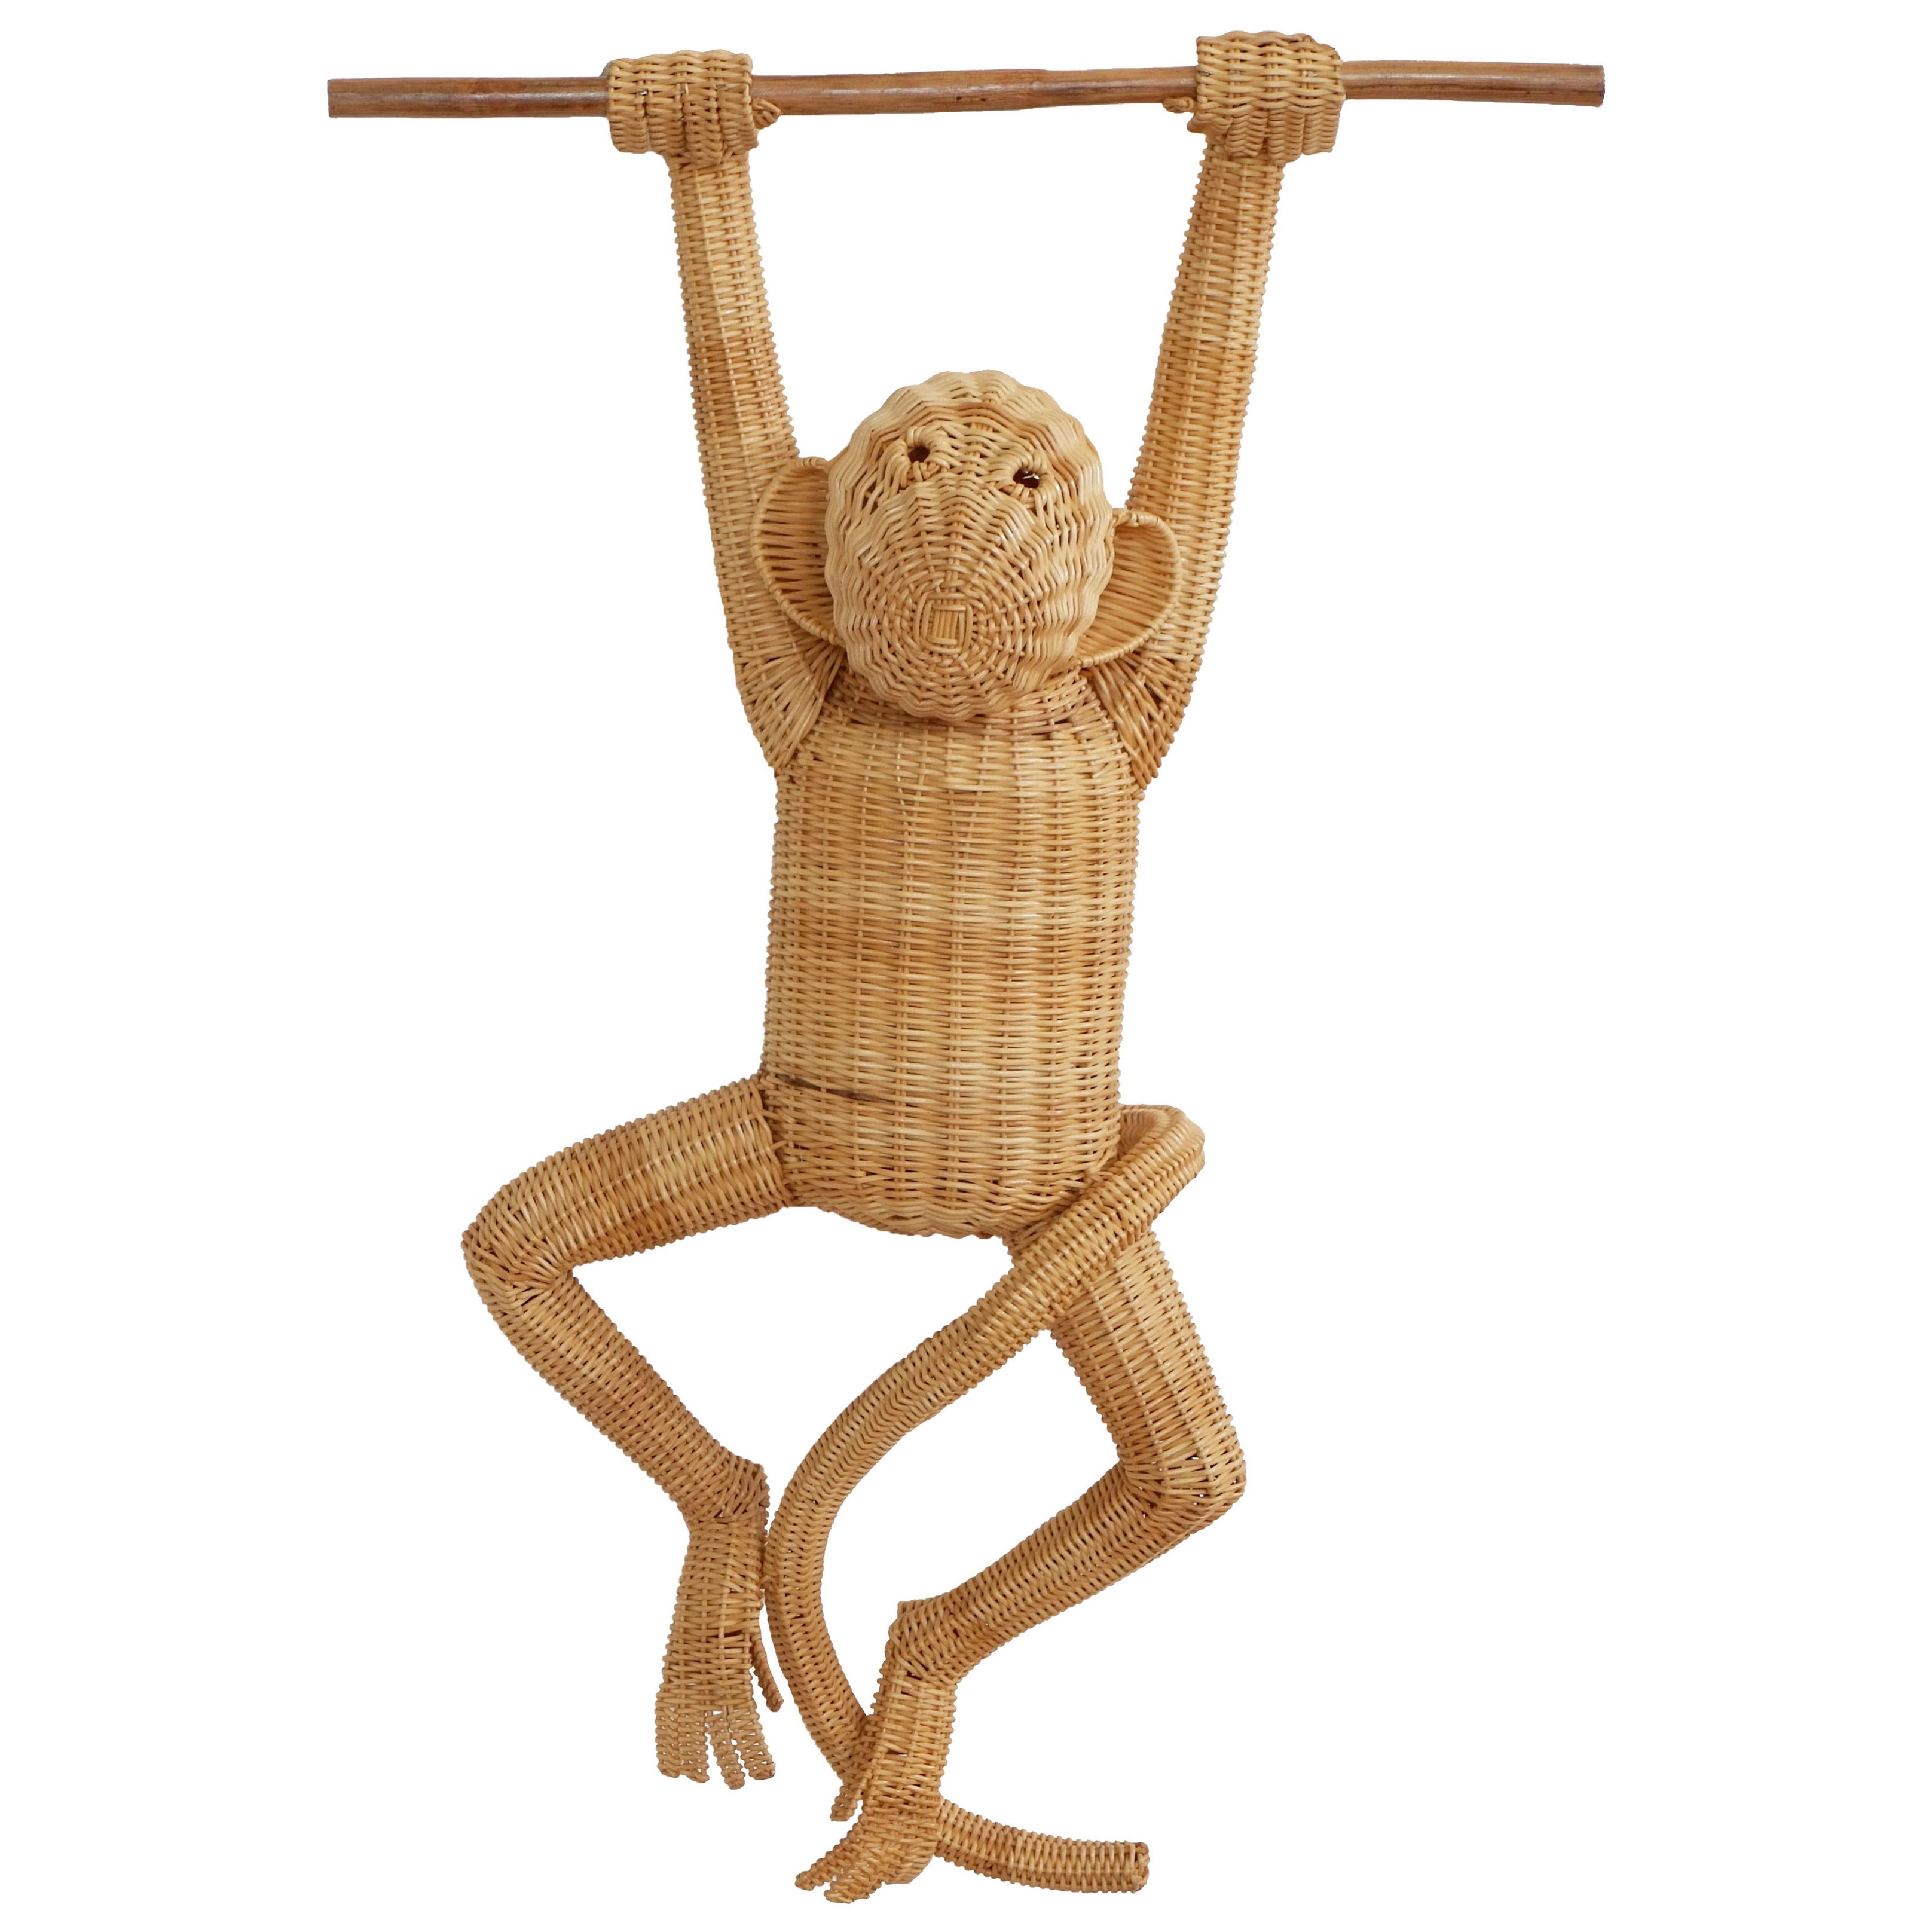 Handmade Wicker Jumpsuit Attached to a Wooden Branch  For Sale